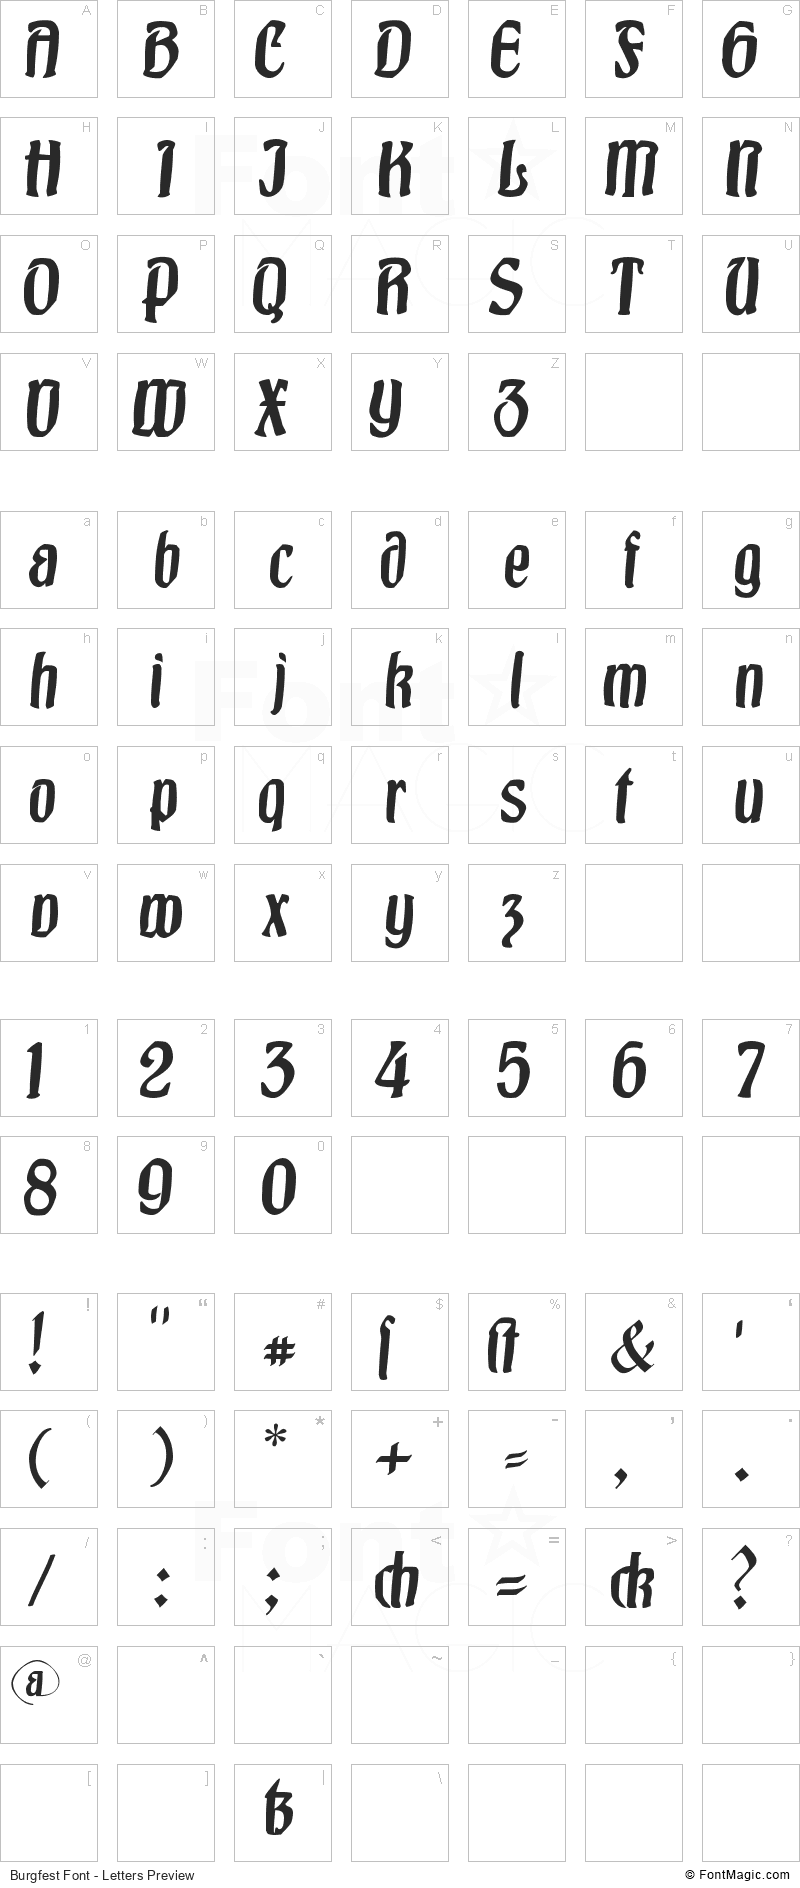 Burgfest Font - All Latters Preview Chart